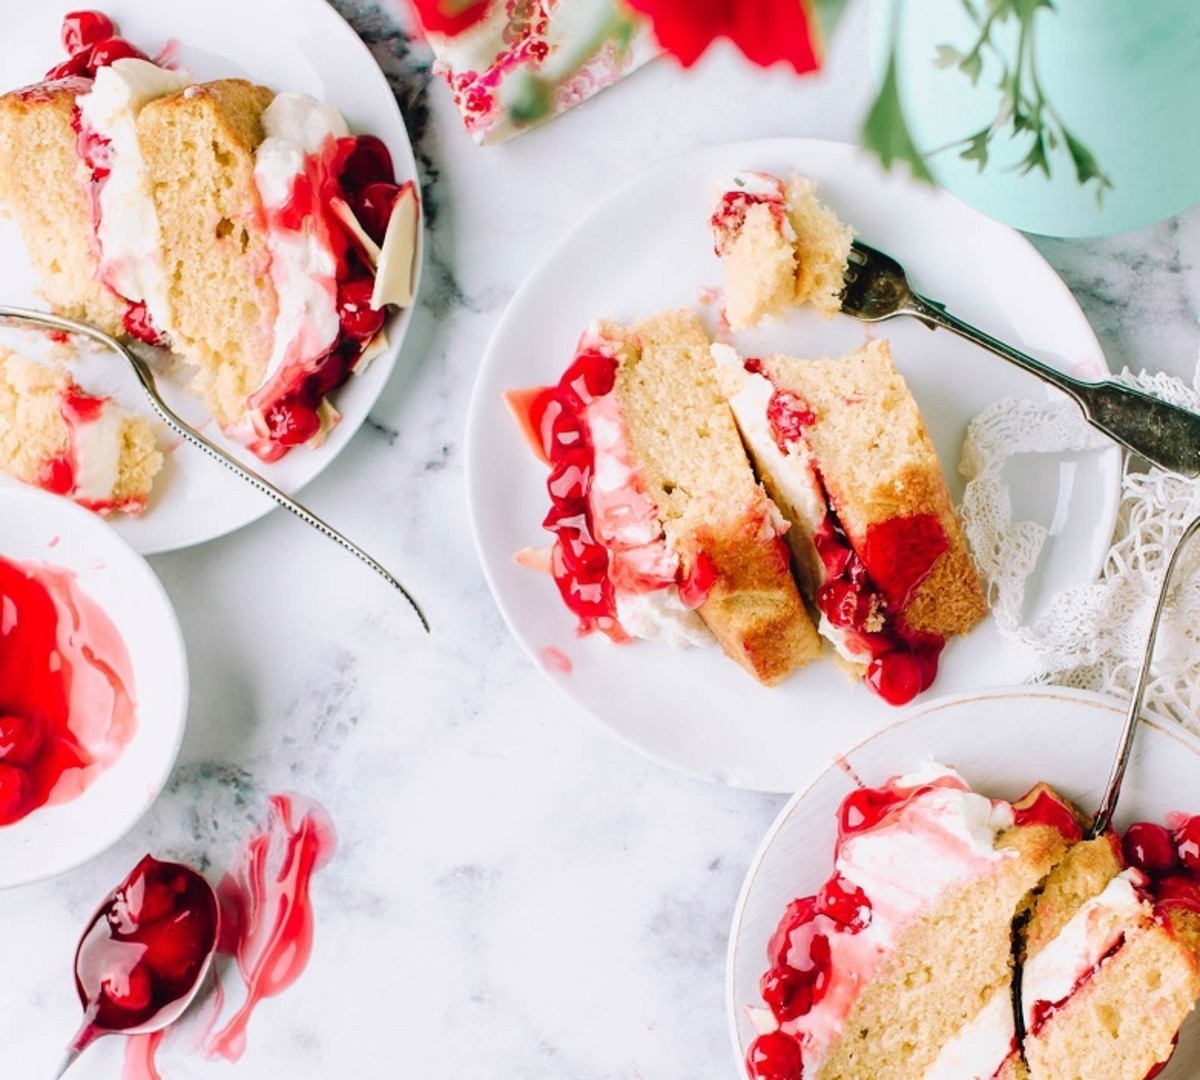 150+ Cake Quotes and Caption Ideas for Instagram